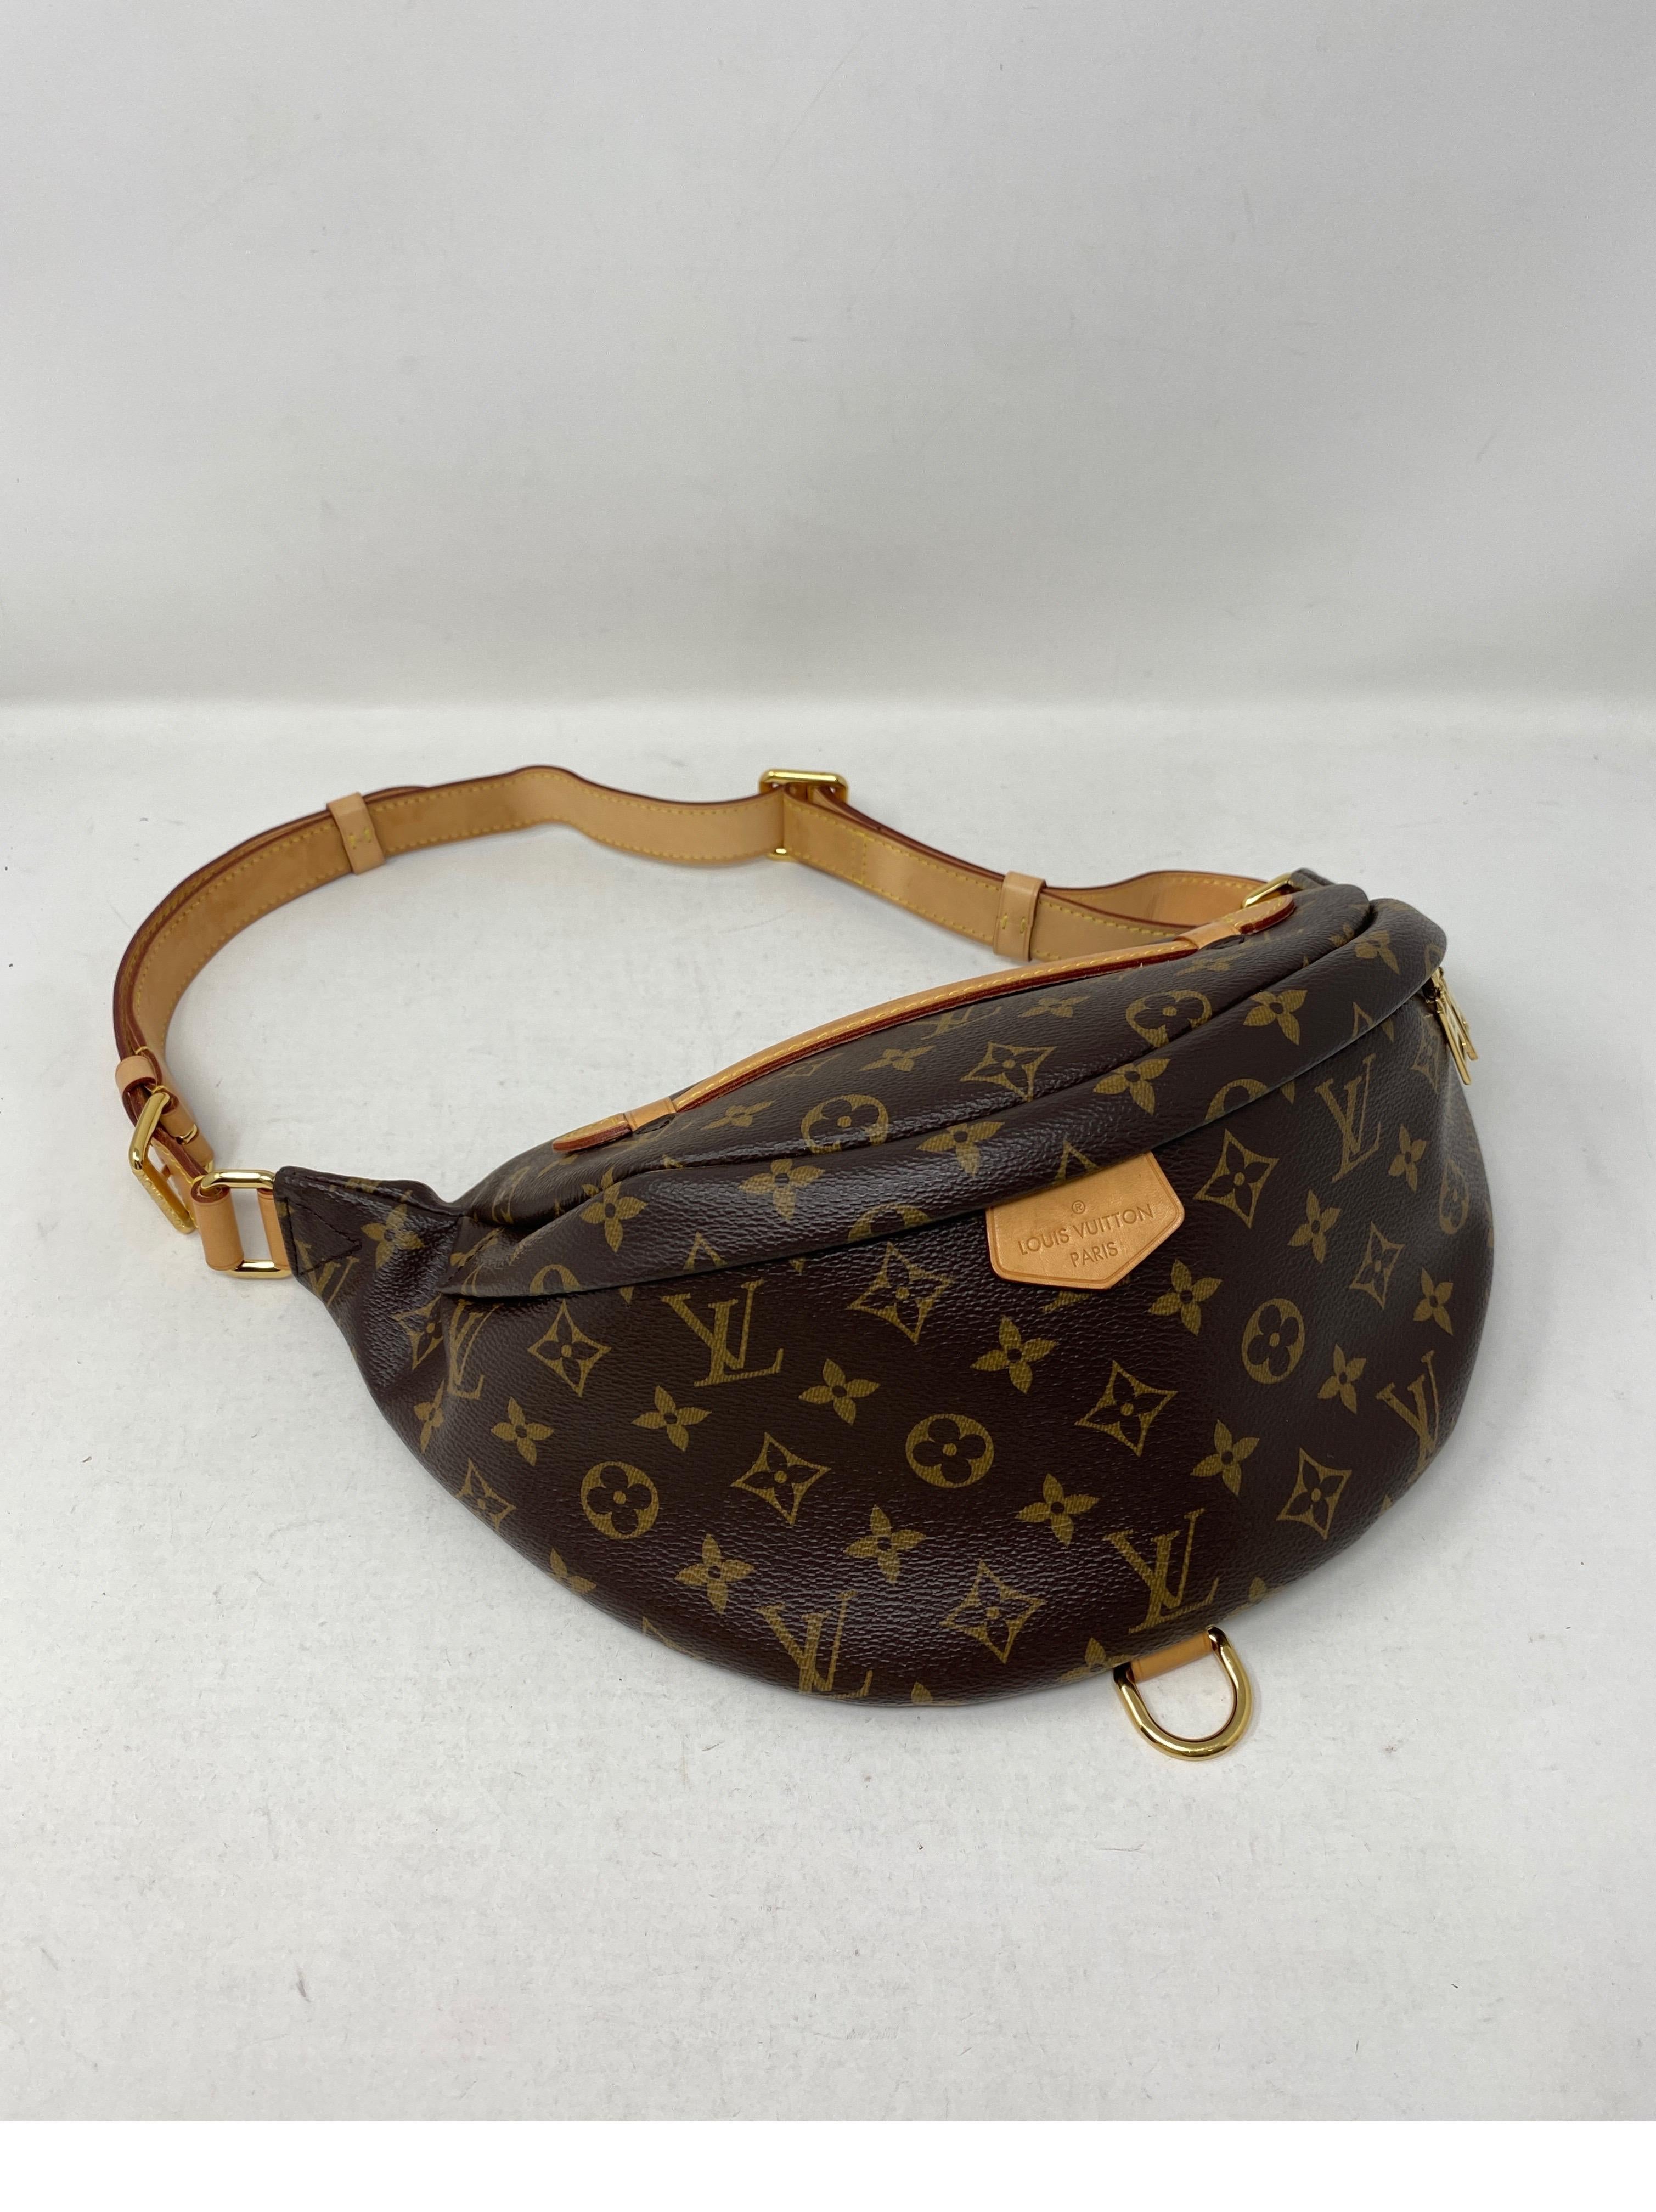 Louis Vuitton Bum Bag  In Excellent Condition For Sale In Athens, GA